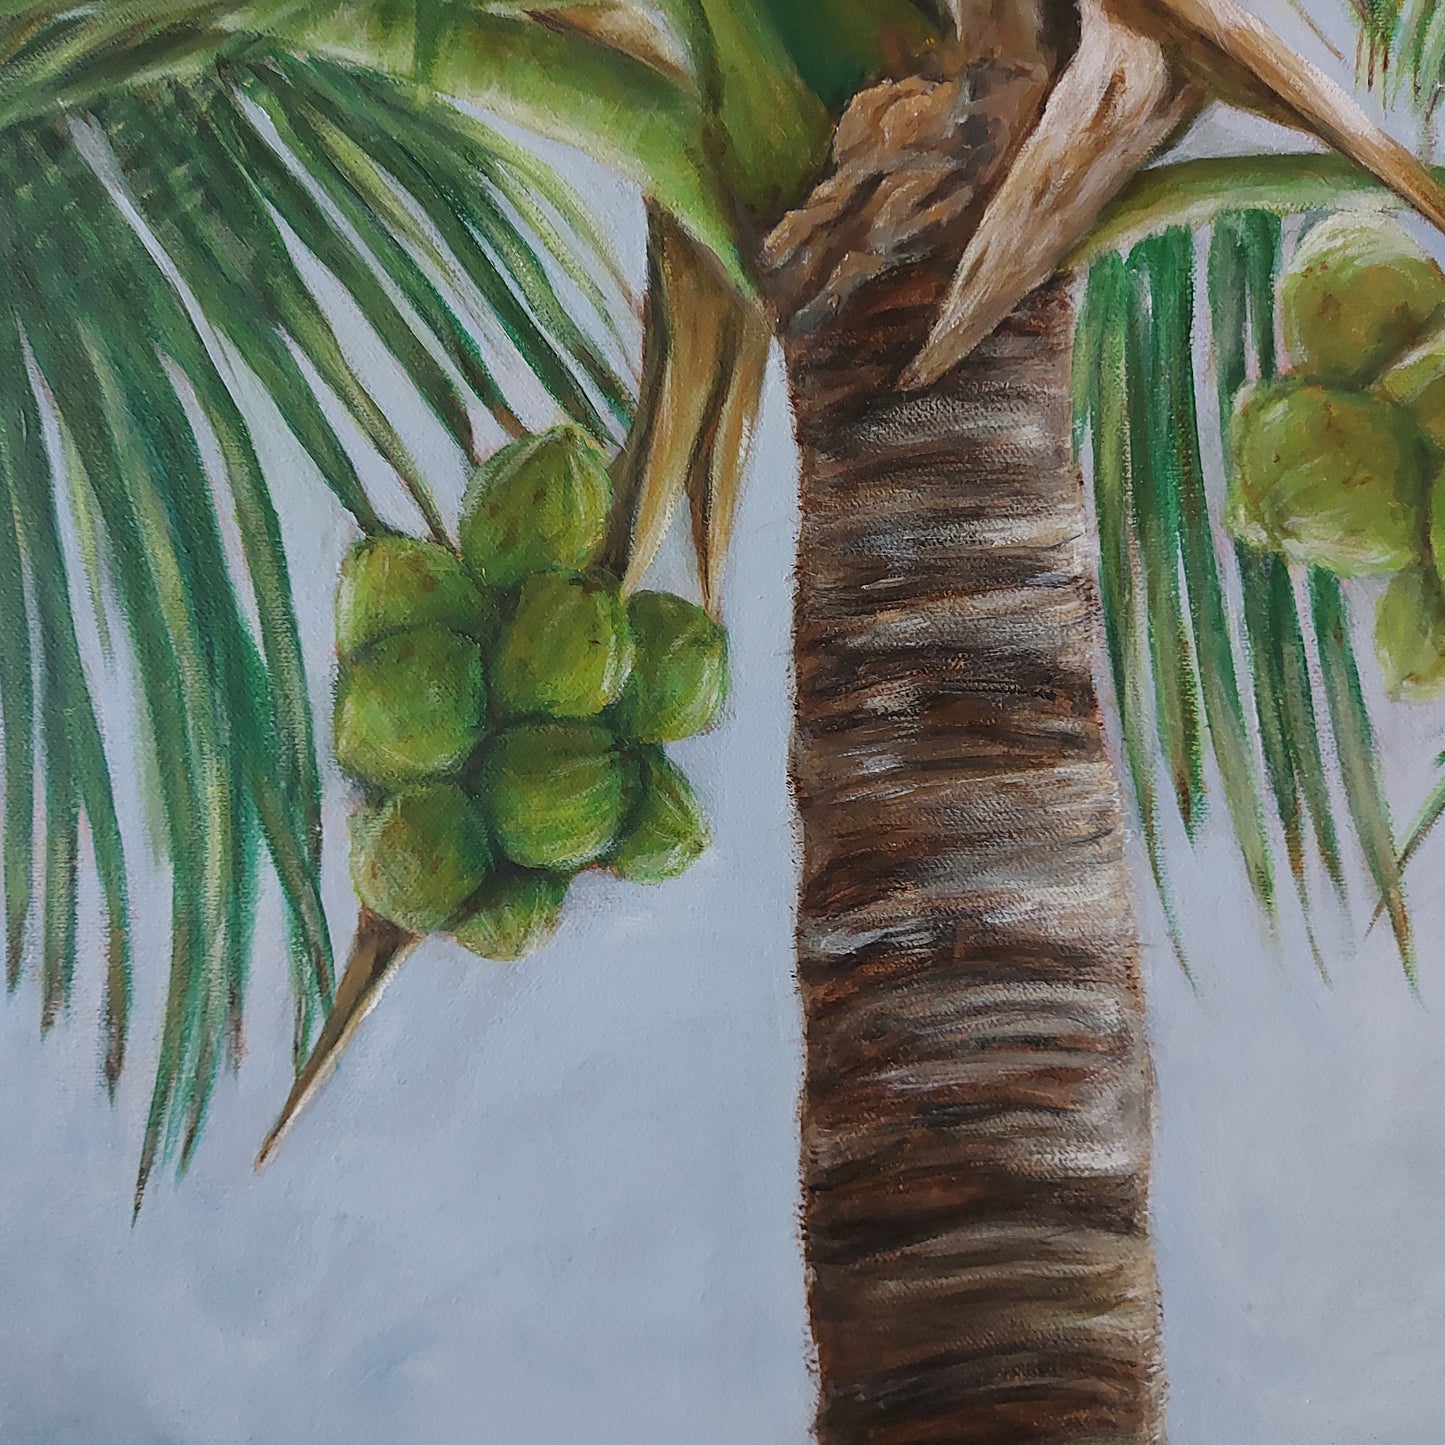 Coconuts & Palms is a close up painting of a coconut palm tree on a warm summer day as the sun peaks through the clouds and shines brightly on some of the leaves. The painting is 24 x 30" oil on canvas by Katherine Polack